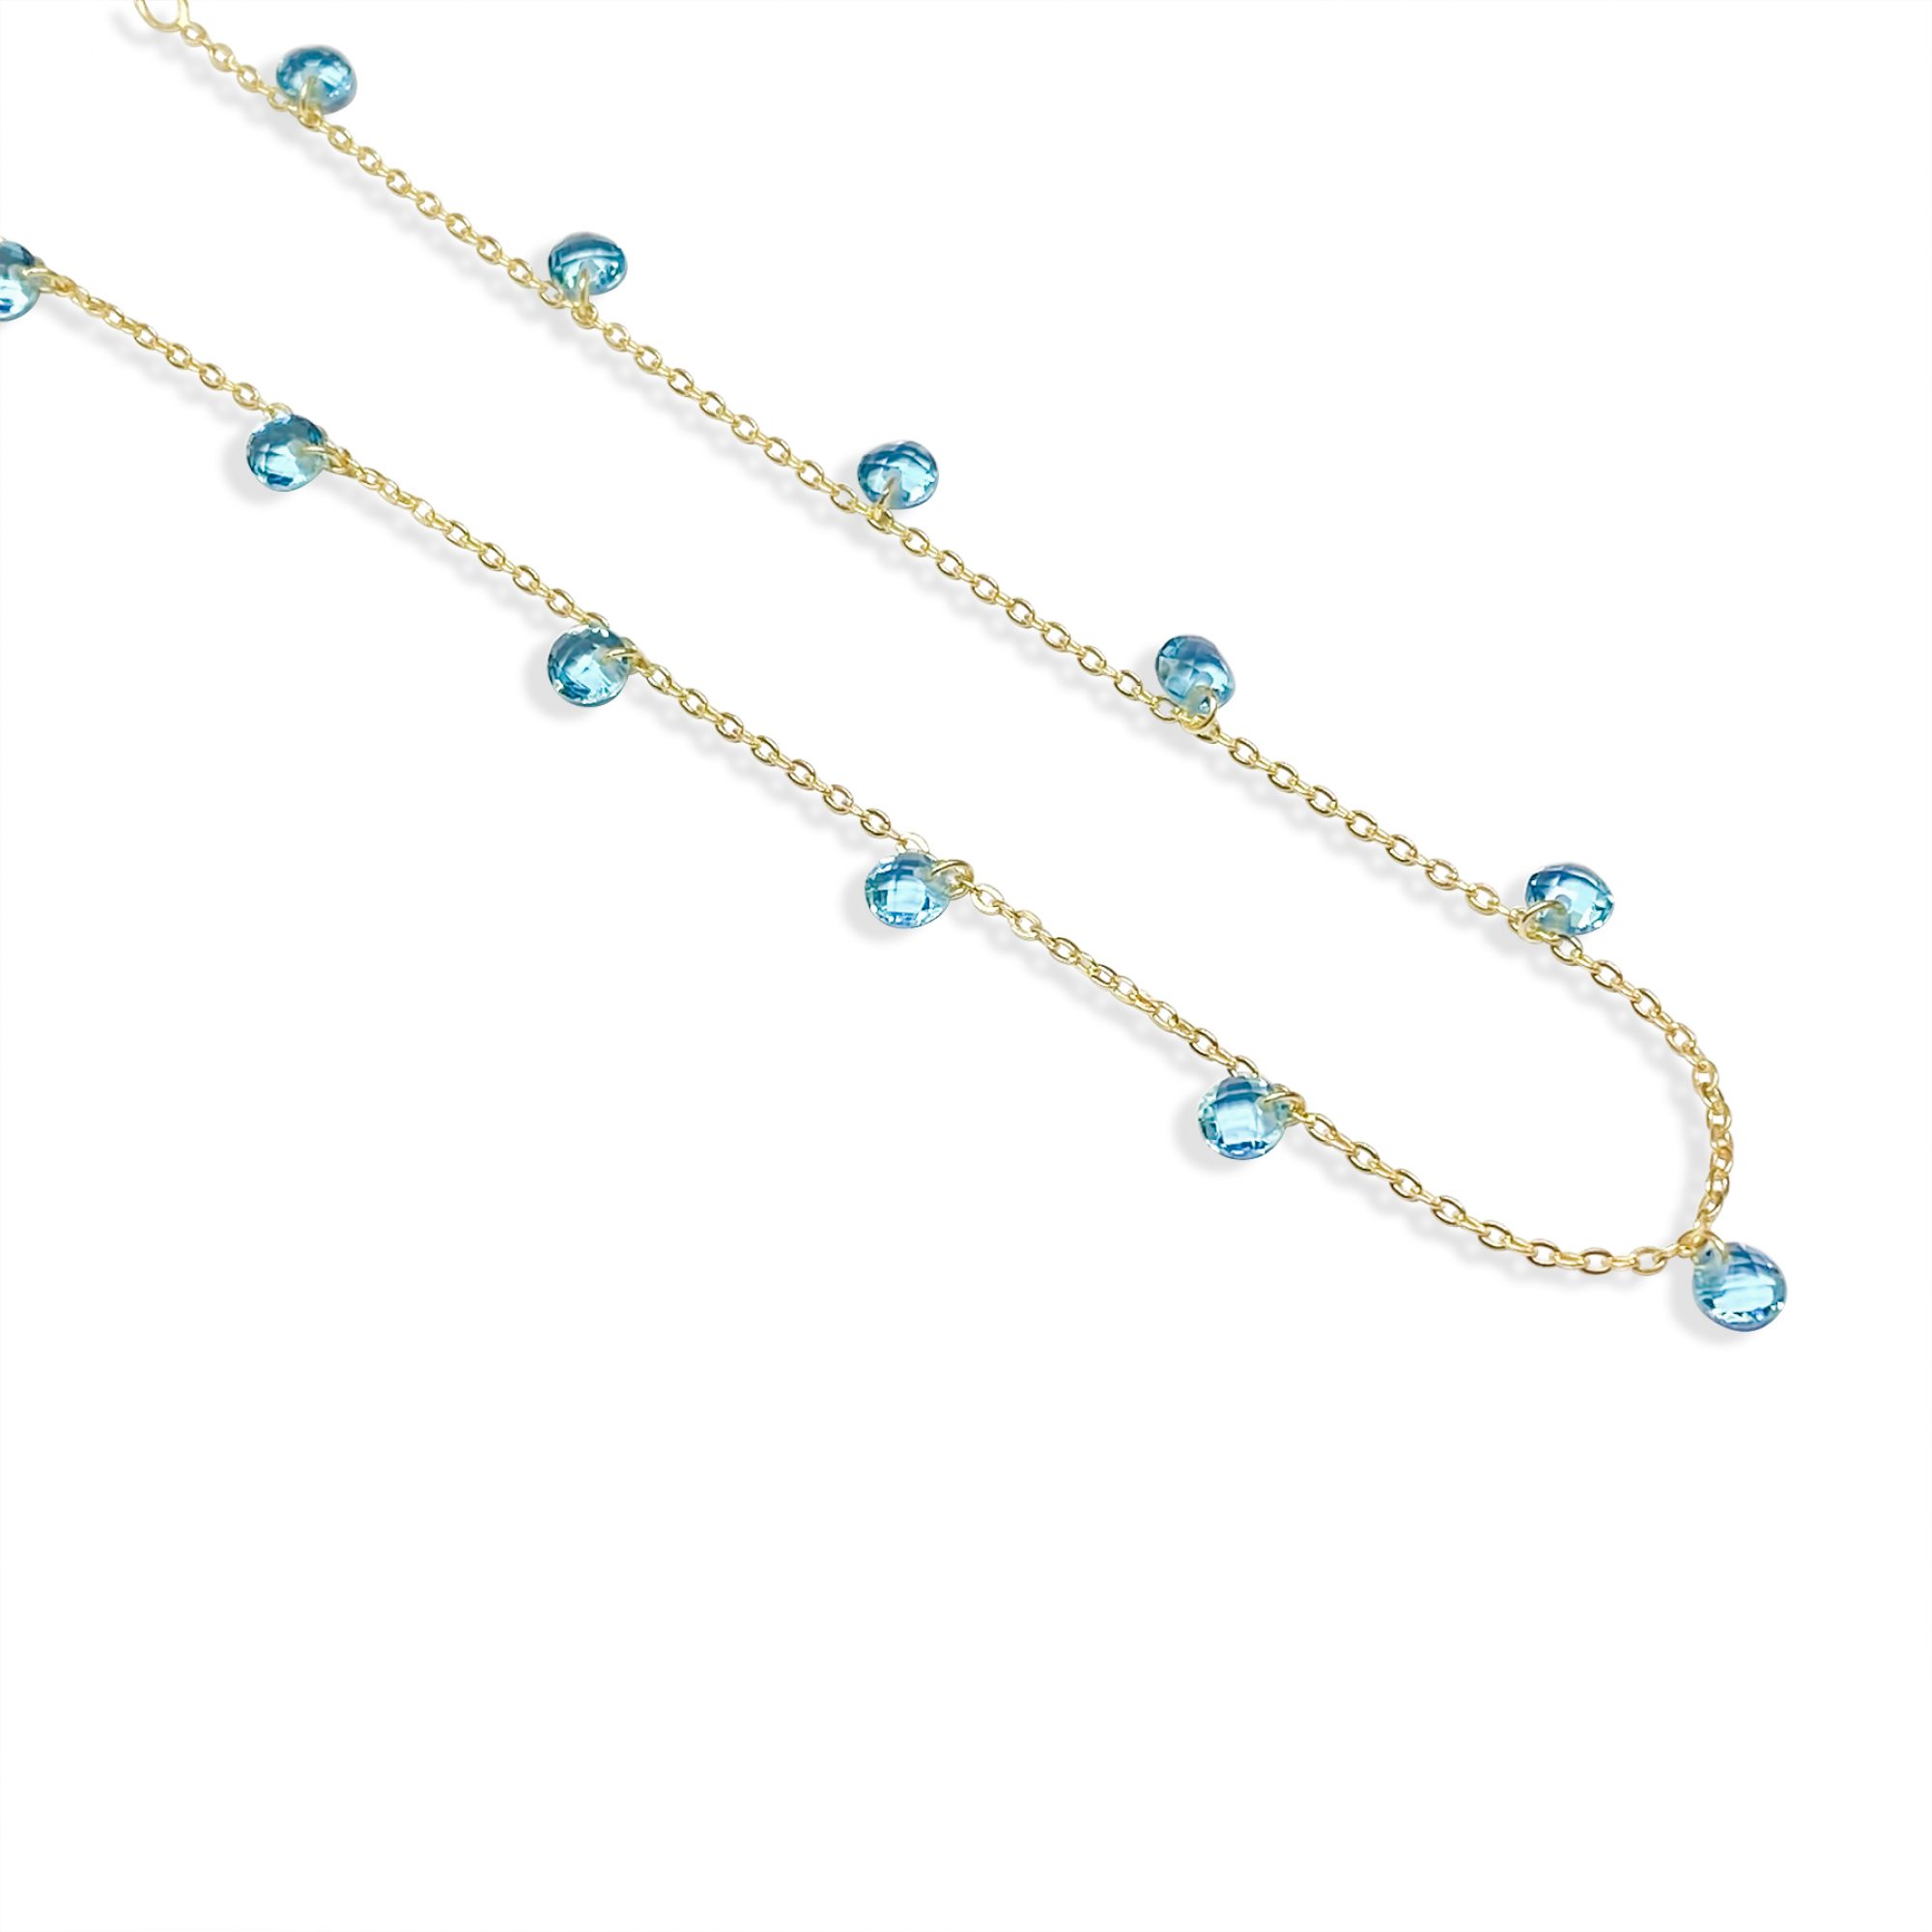 Gold plated anklet with aquamarine dangles